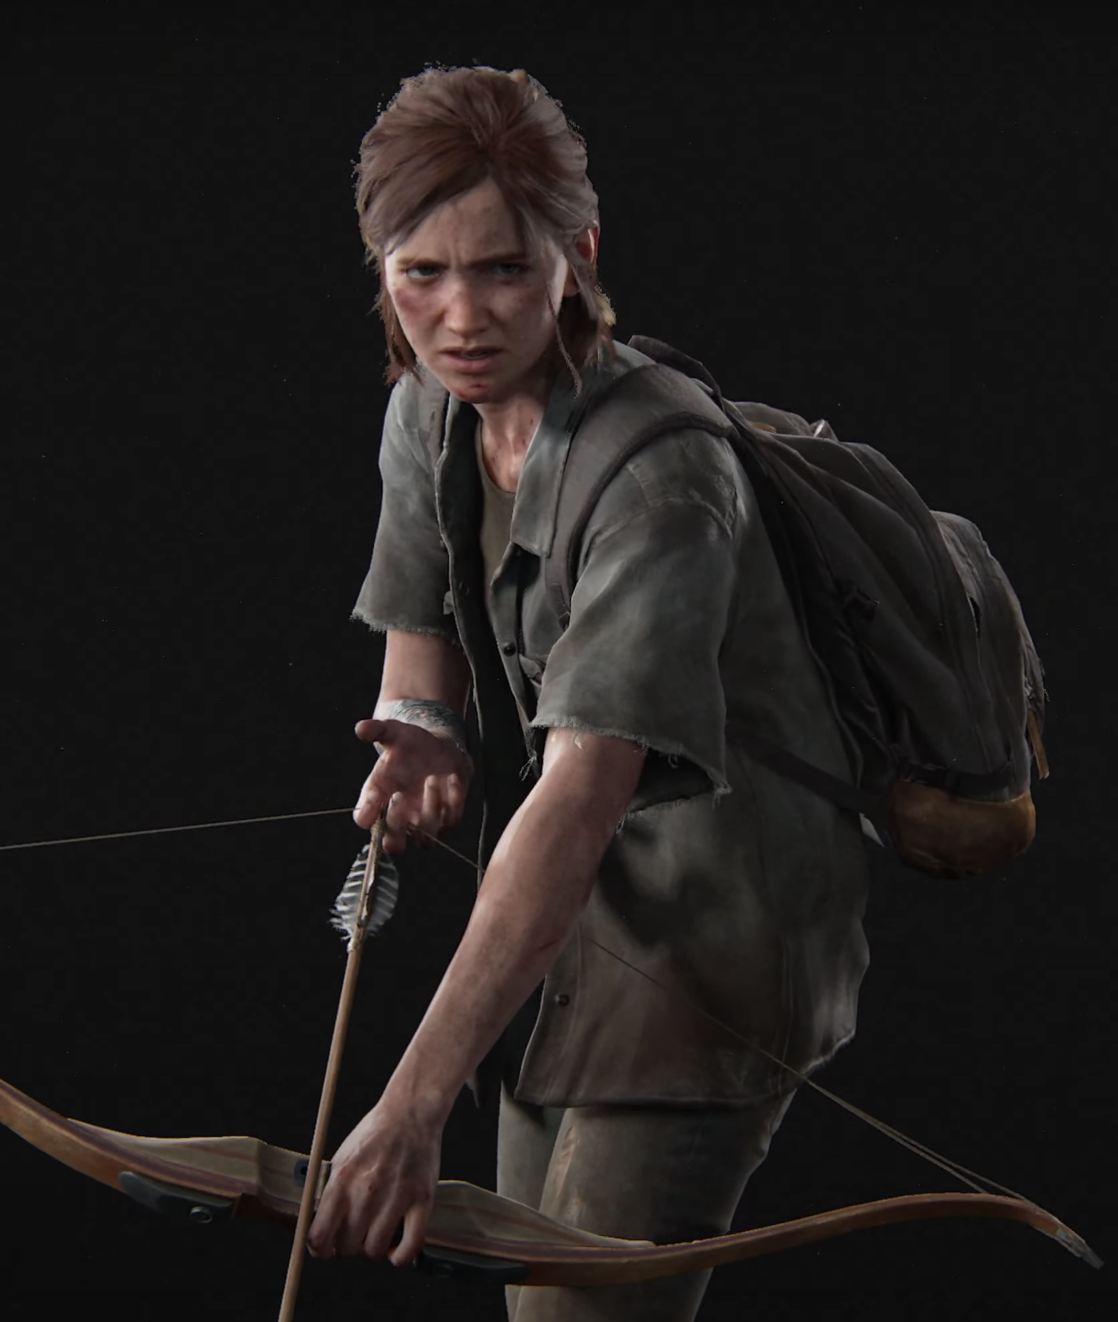 Ellie (The Last of Us Part II) - Loathsome Characters Wiki